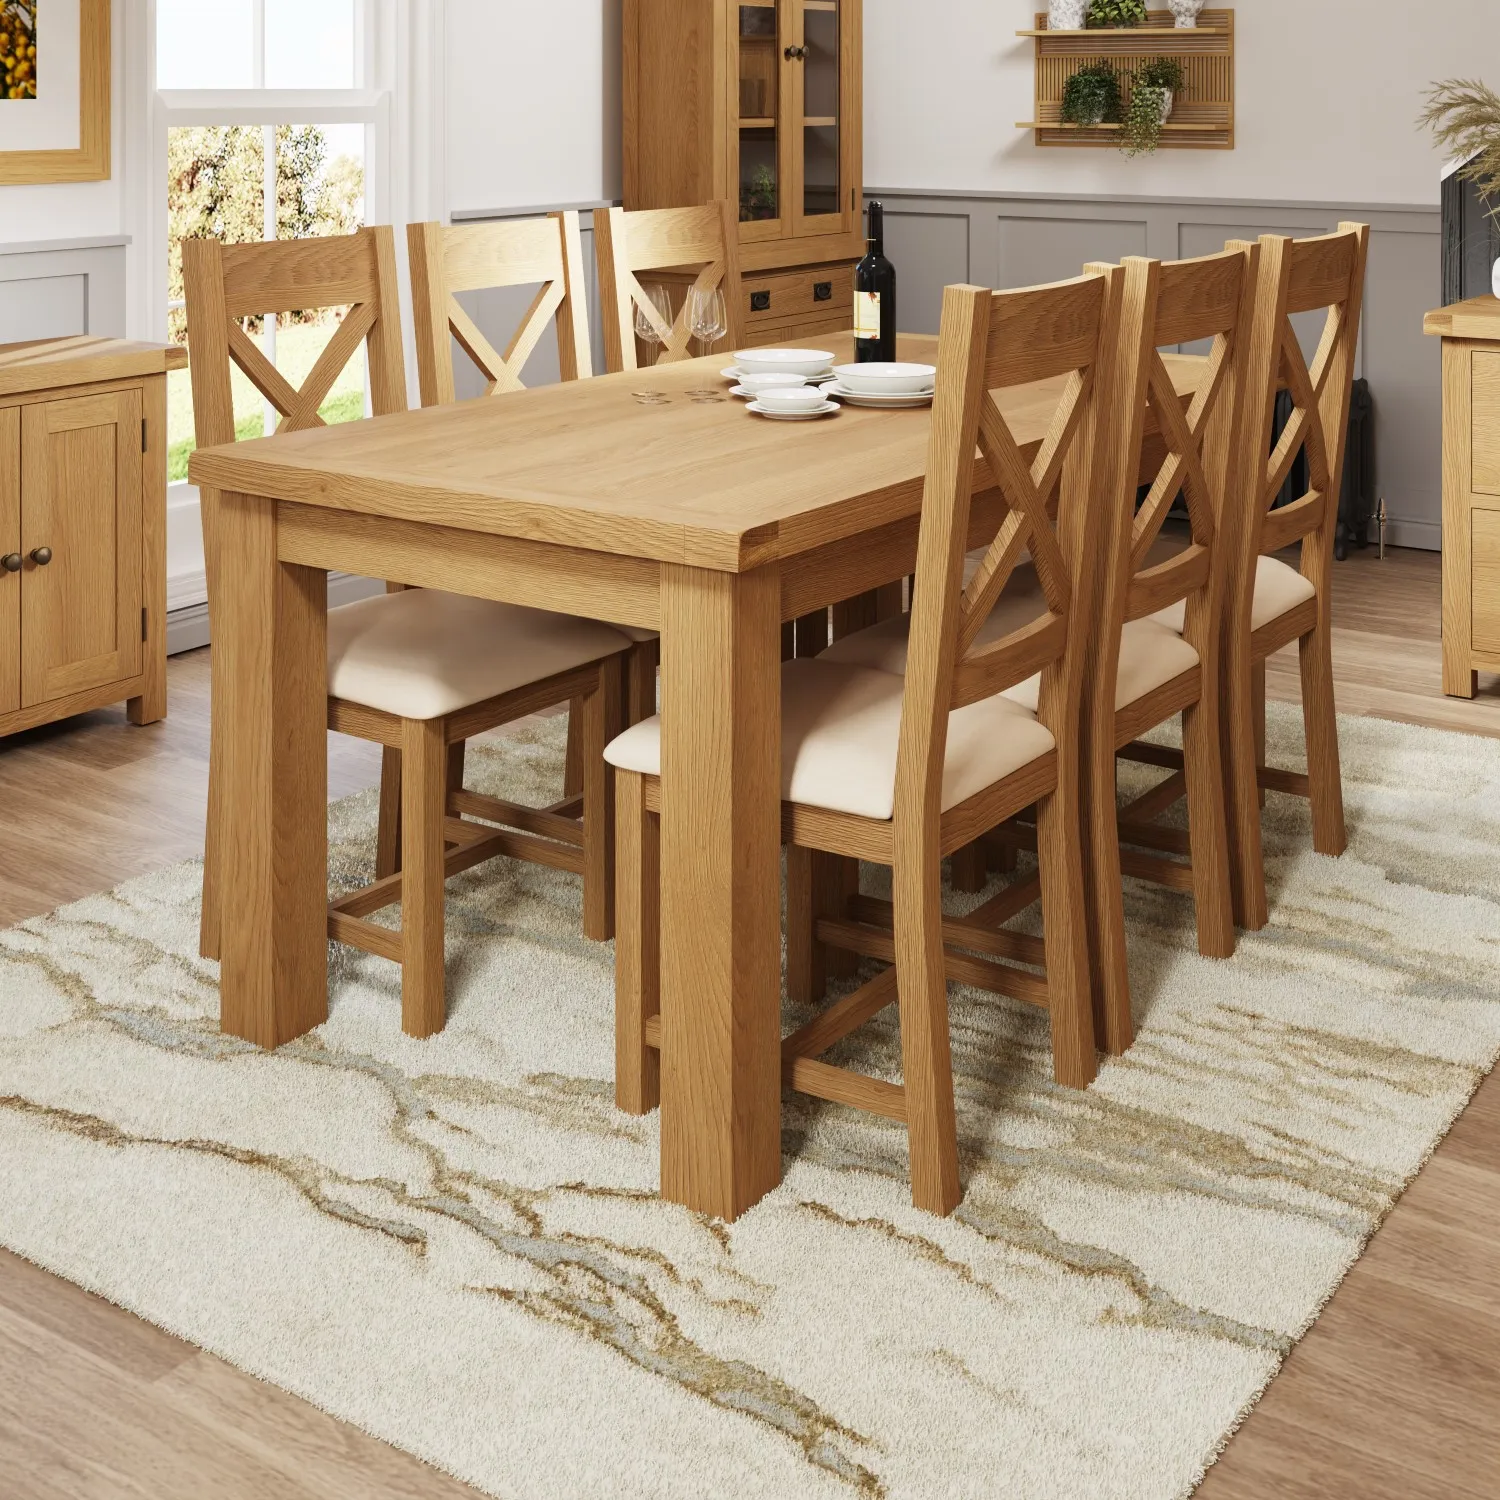 Oak 6 to 8 Seater Butterfly Extending Dining Table